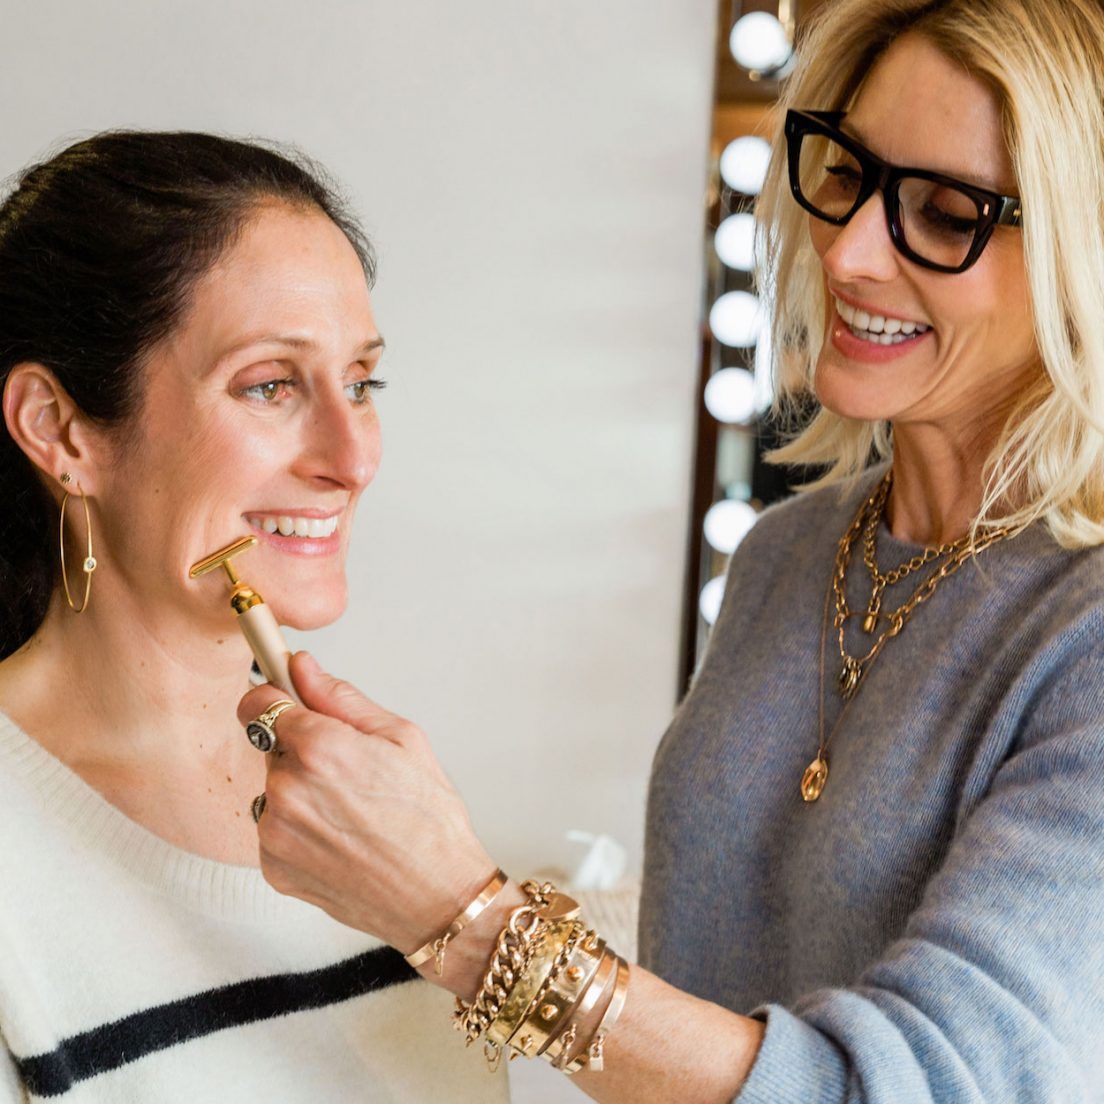 Lift, Tone, and Sculpt Skin with a Luxe New Vibrating Gold Bar | Goop -   18 beauty Bar tool ideas